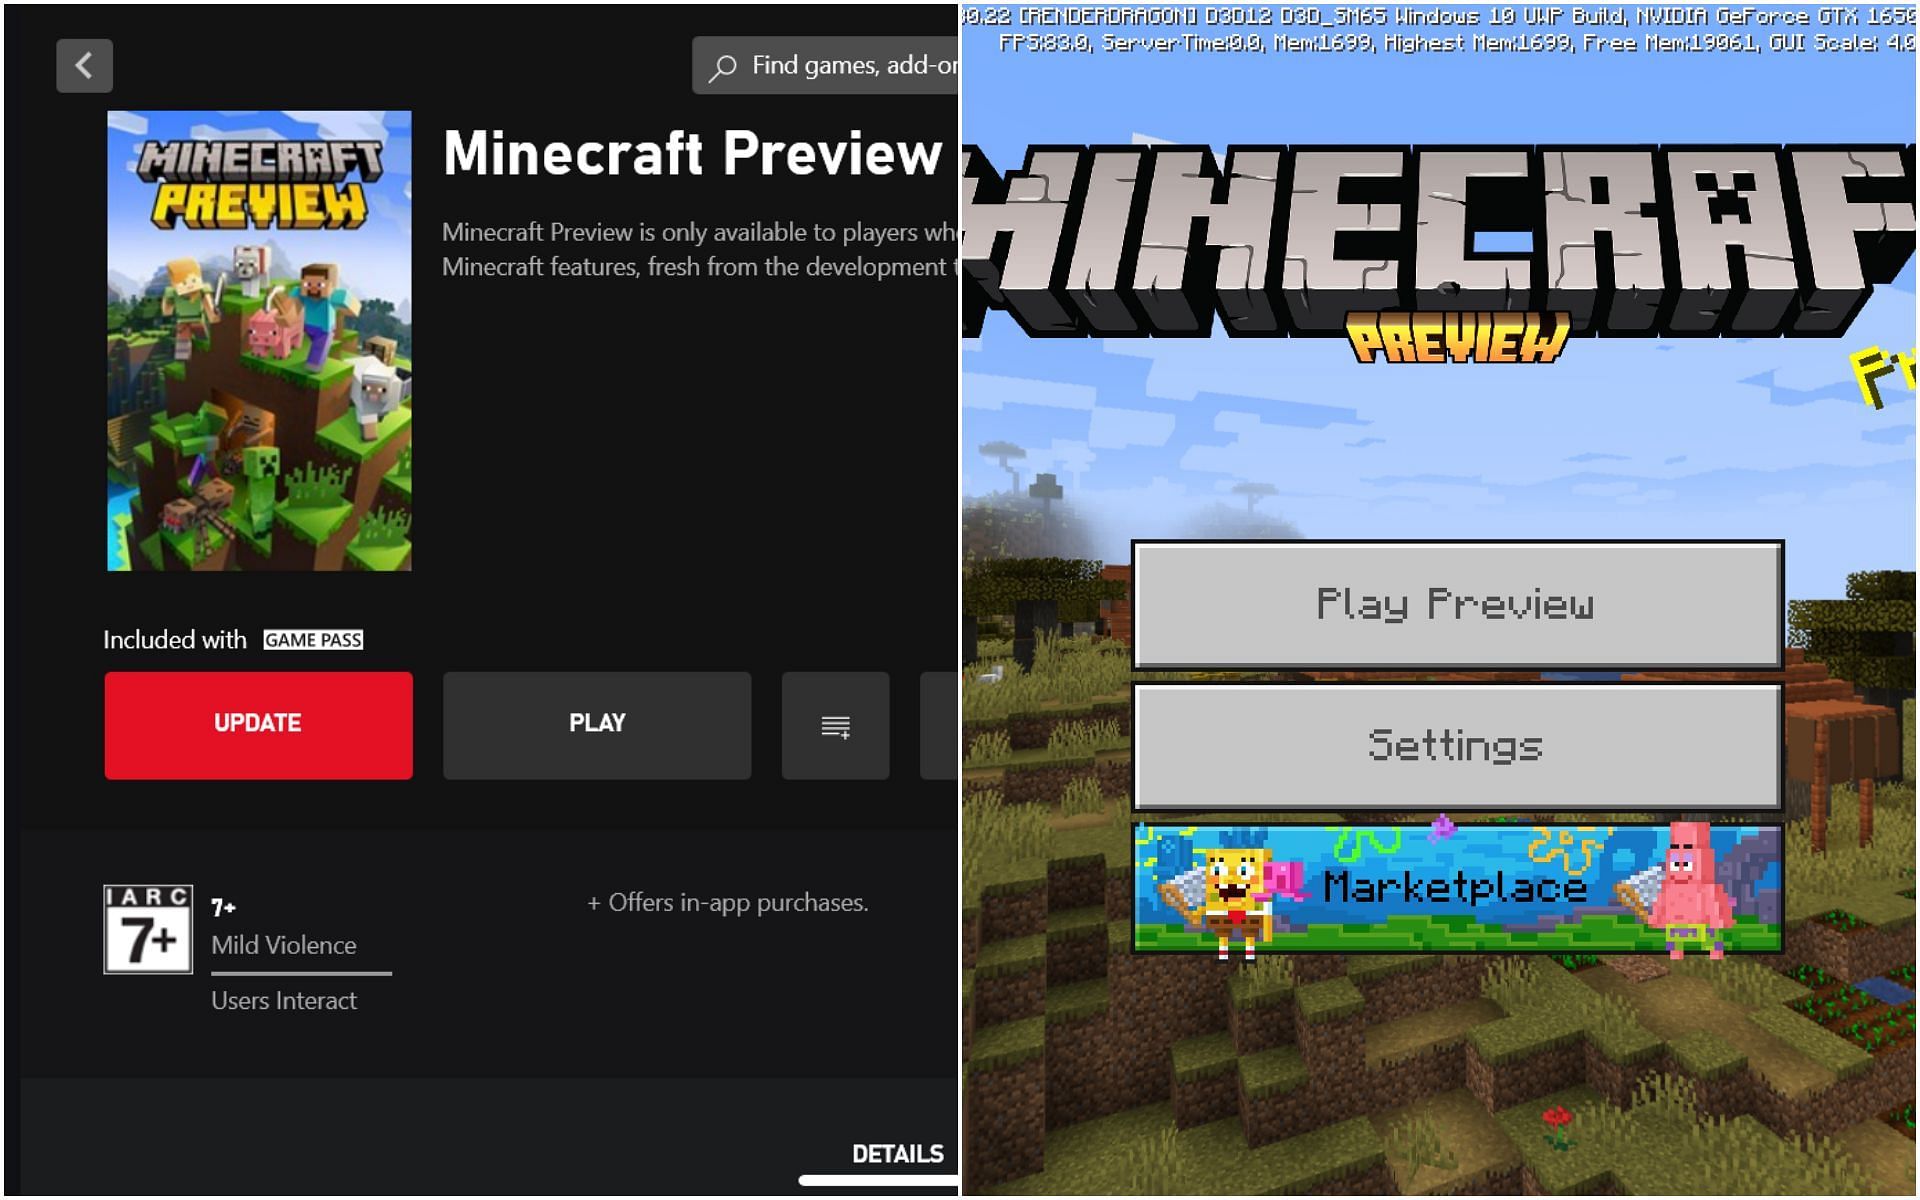 How to Download Minecraft Beta (1.5.01) on Windows 10, XBOX One